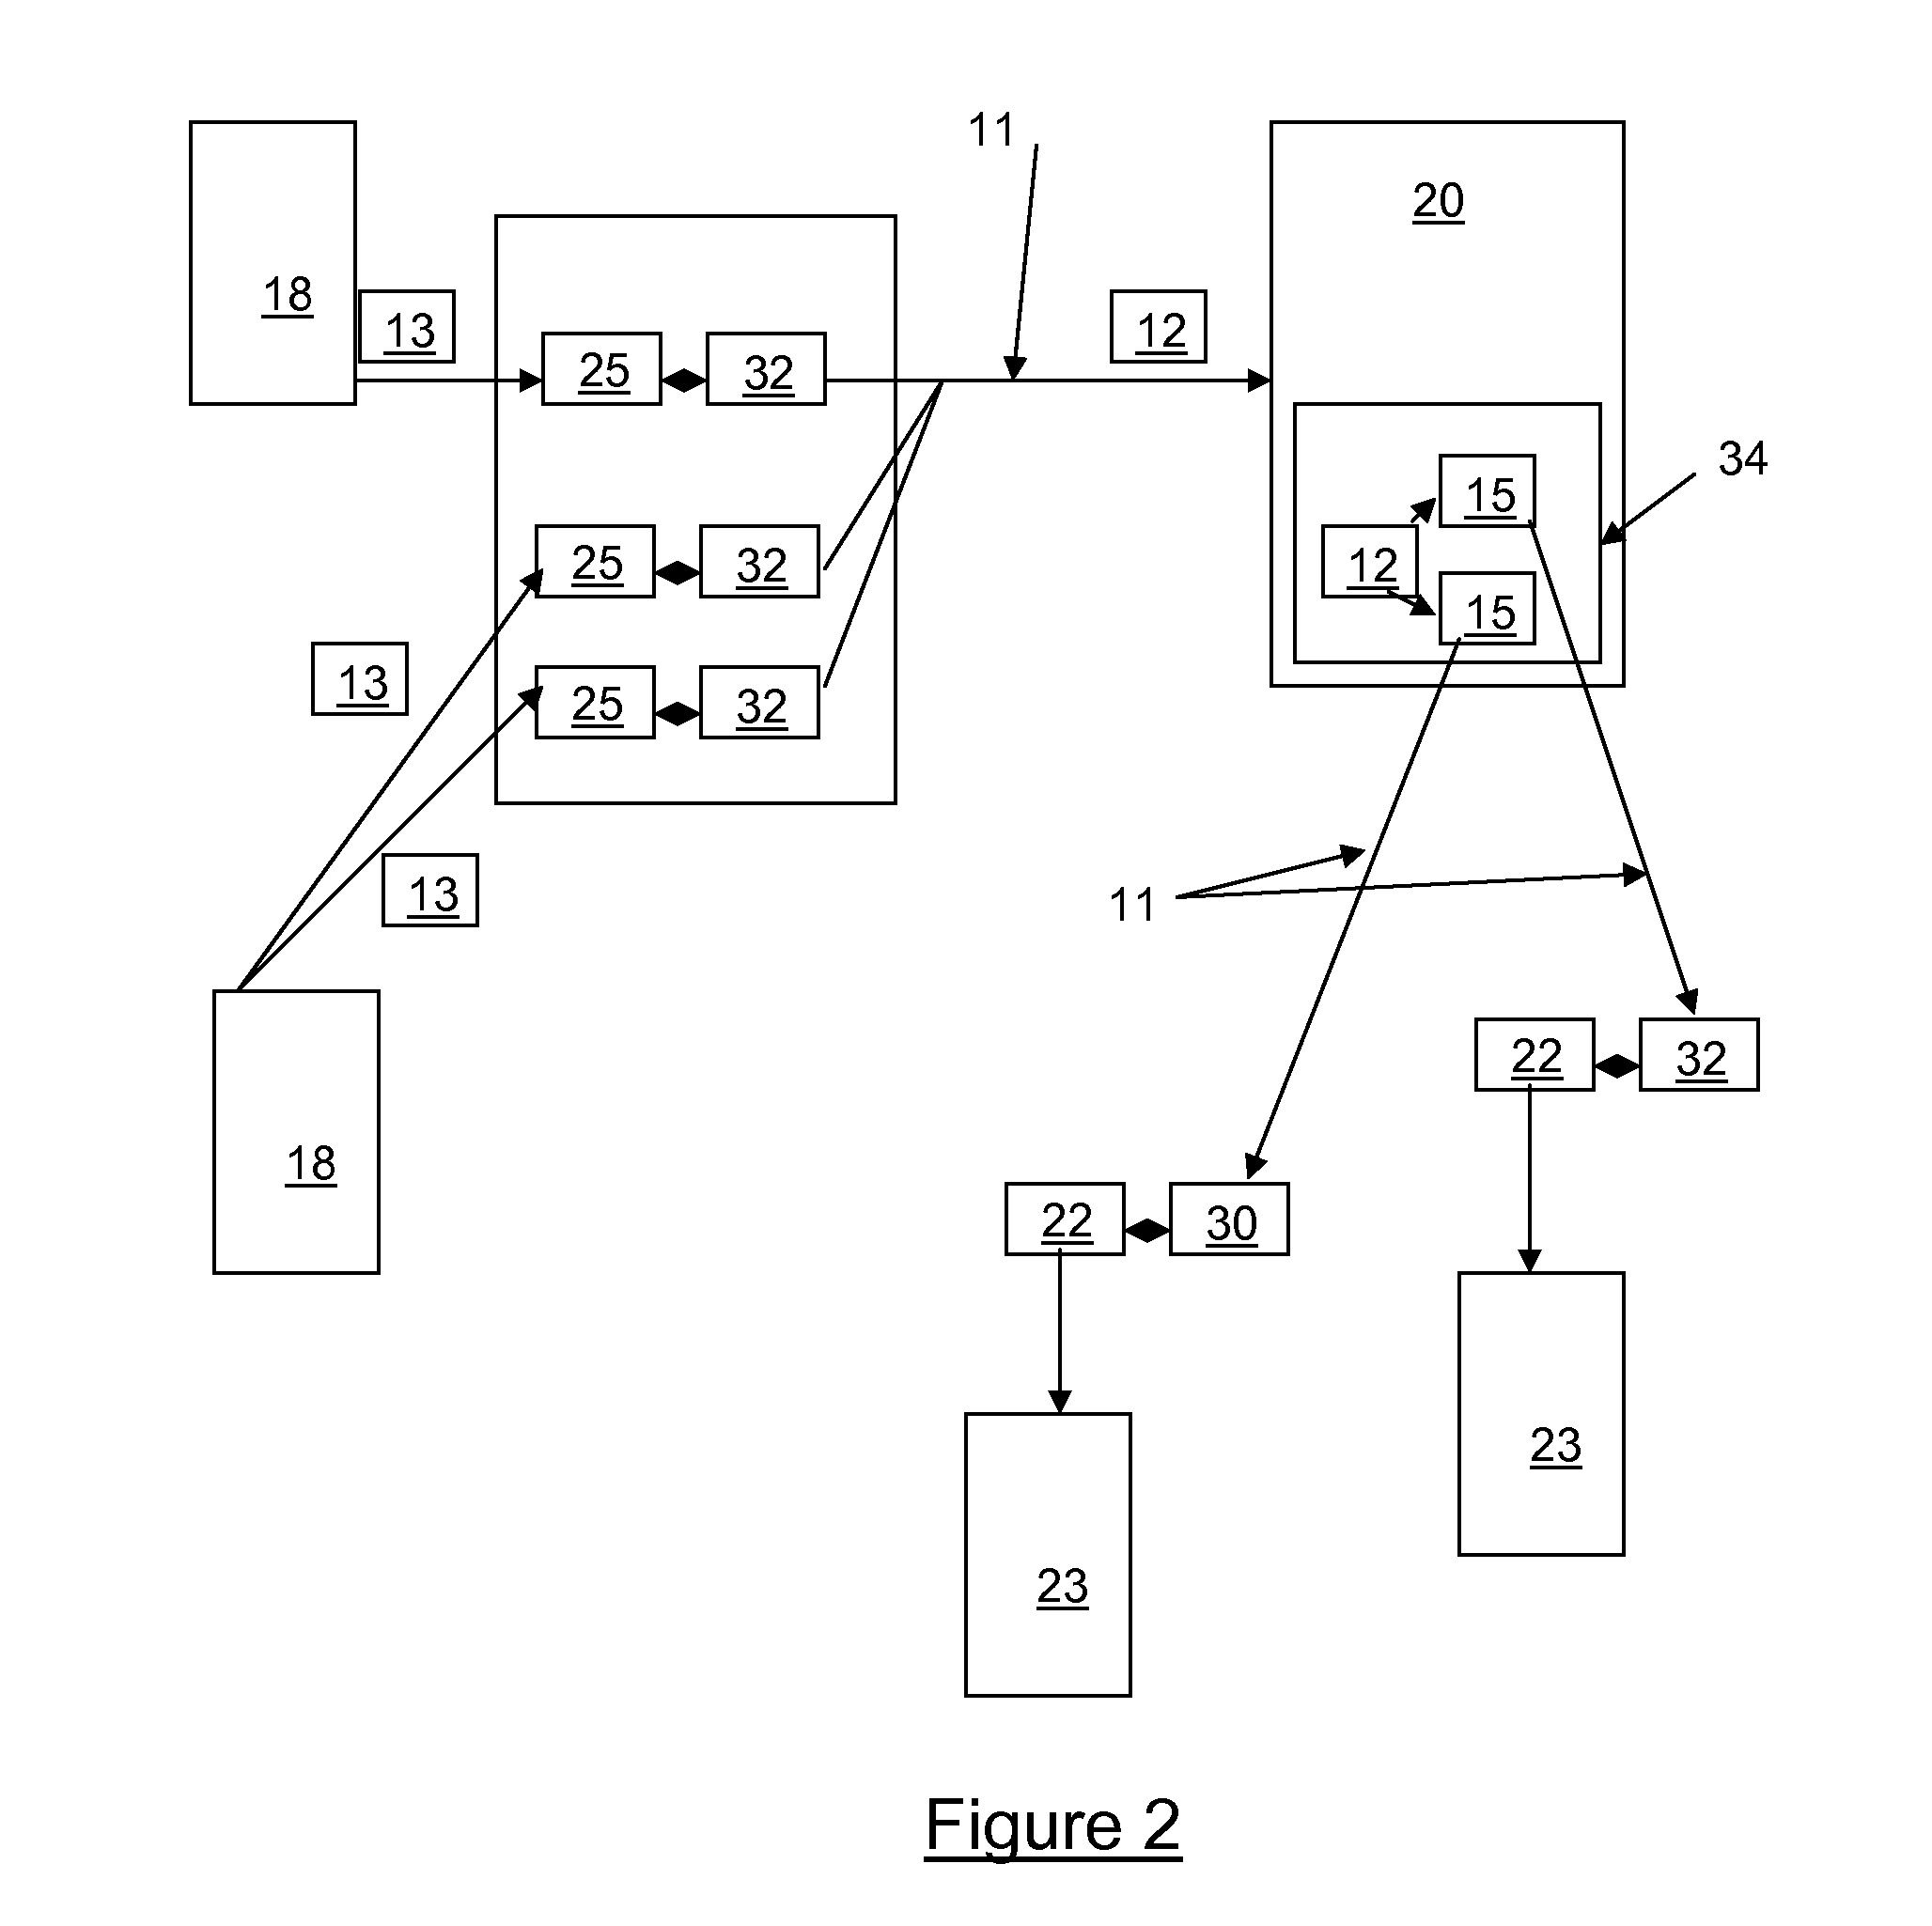 System and method for facilitating video quality of live broadcast information over a shared packet based network